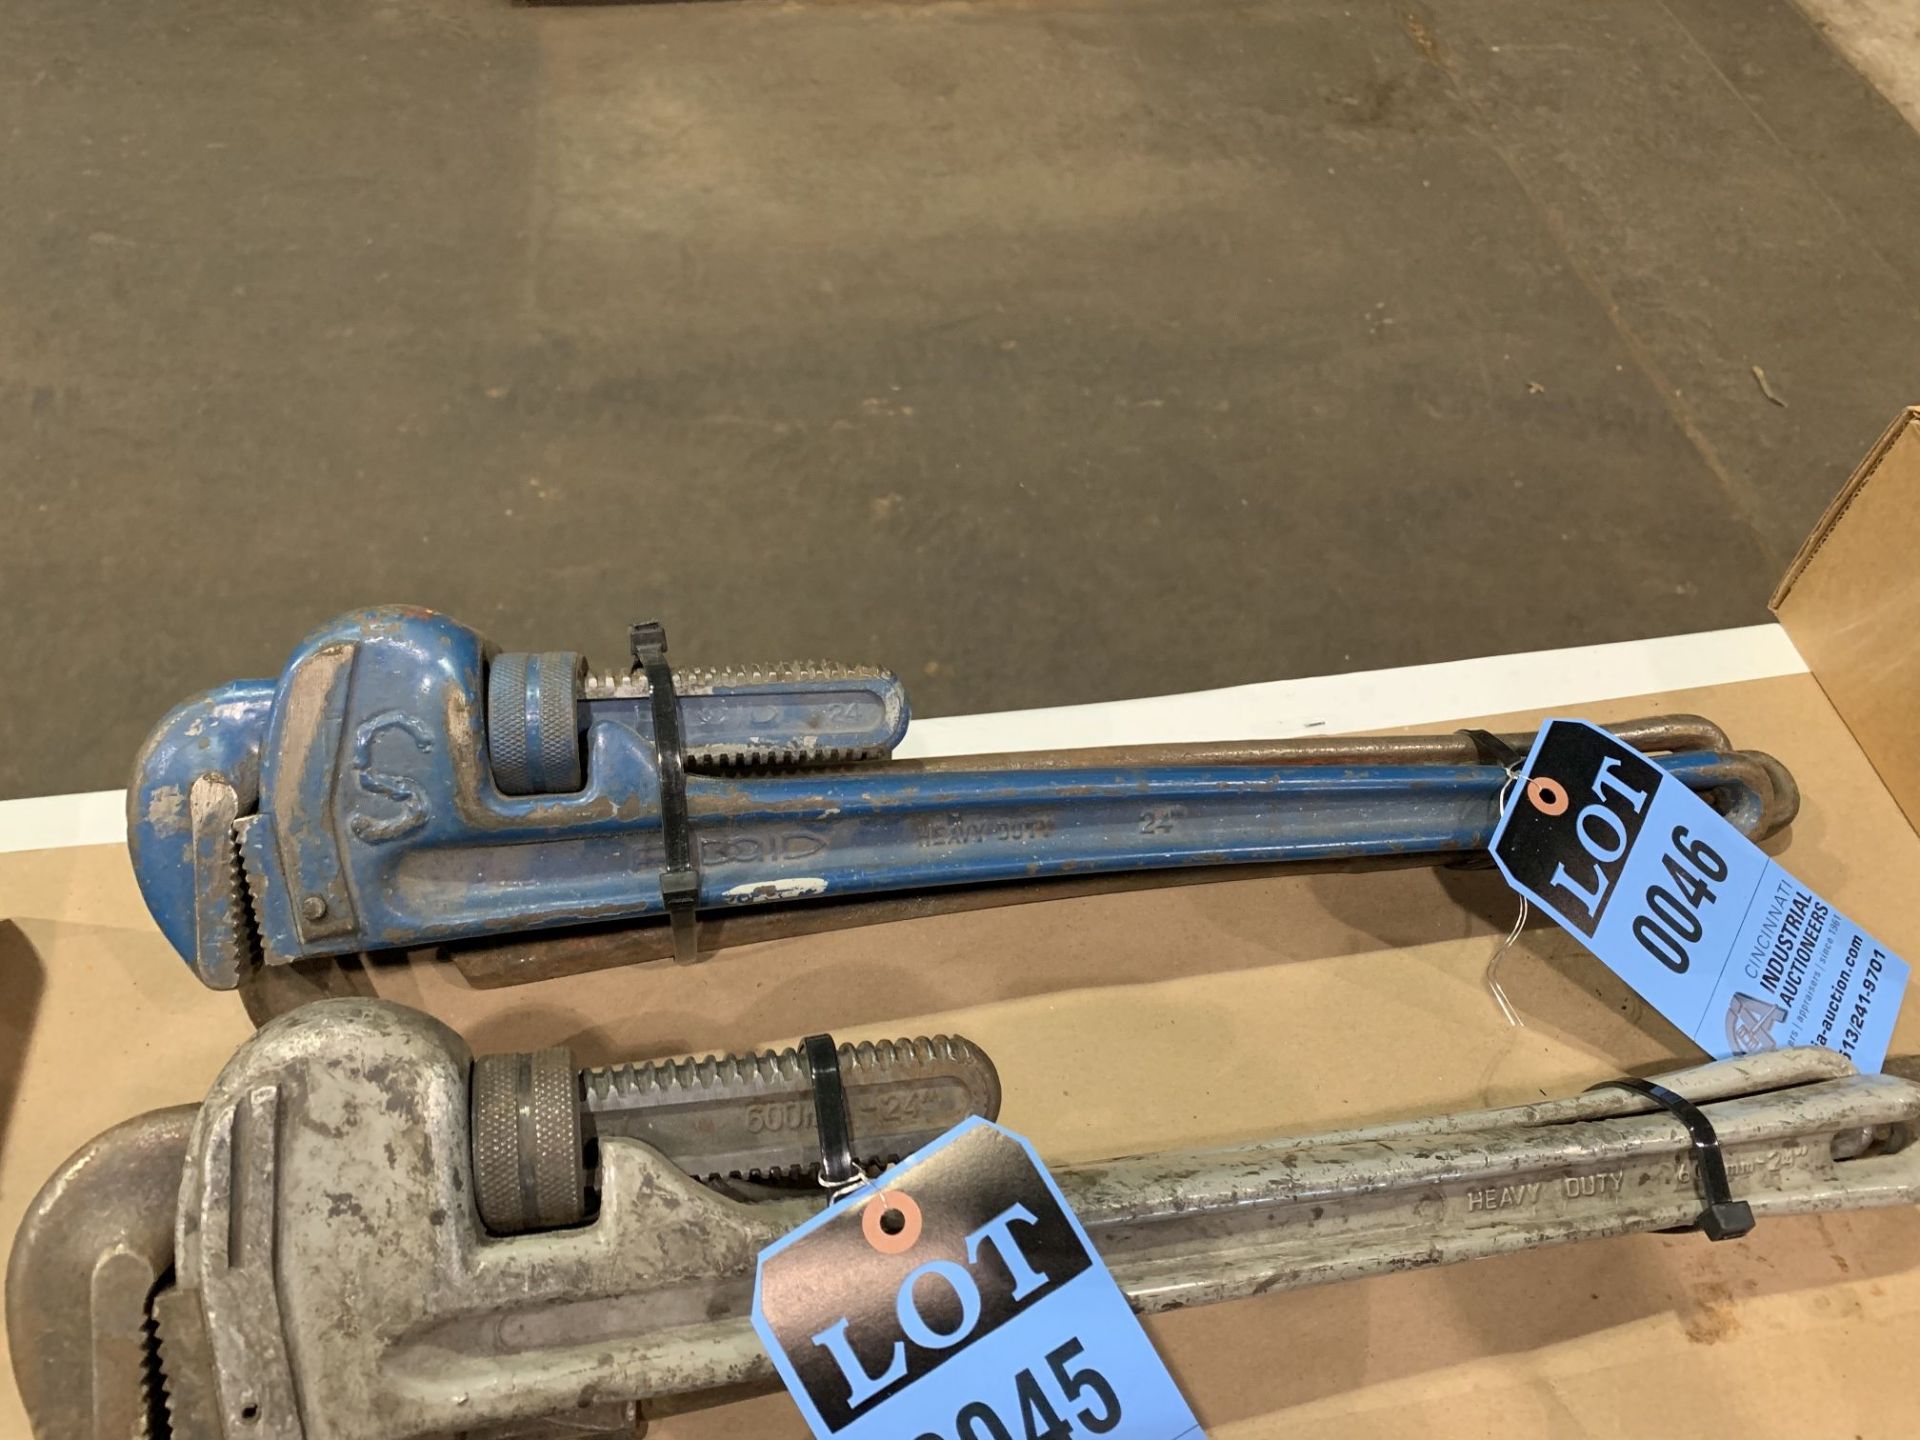 24" PIPE WRENCHES